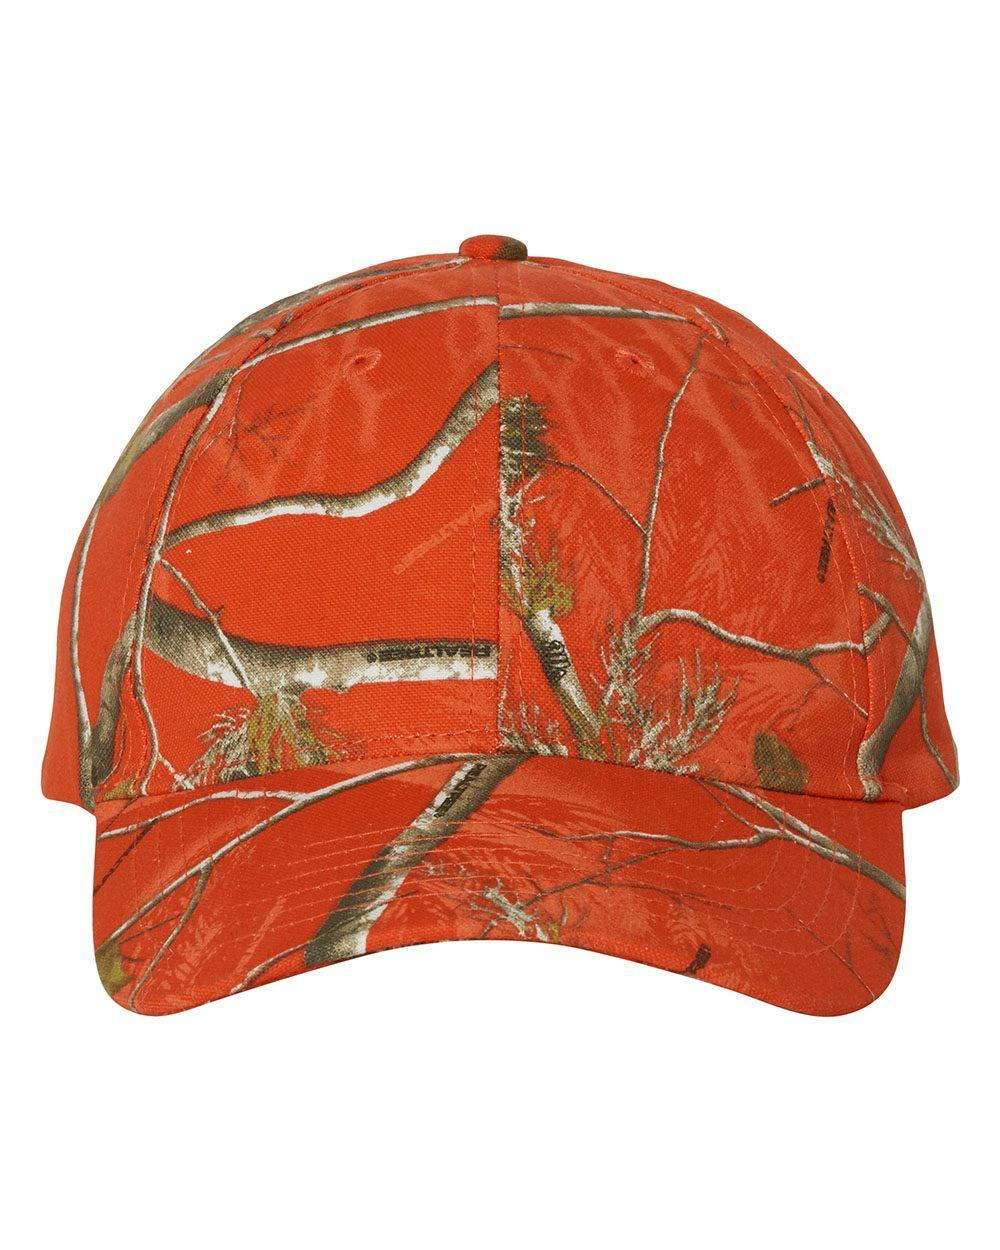 Image for Specialty Licensed Camo Cap - SN200